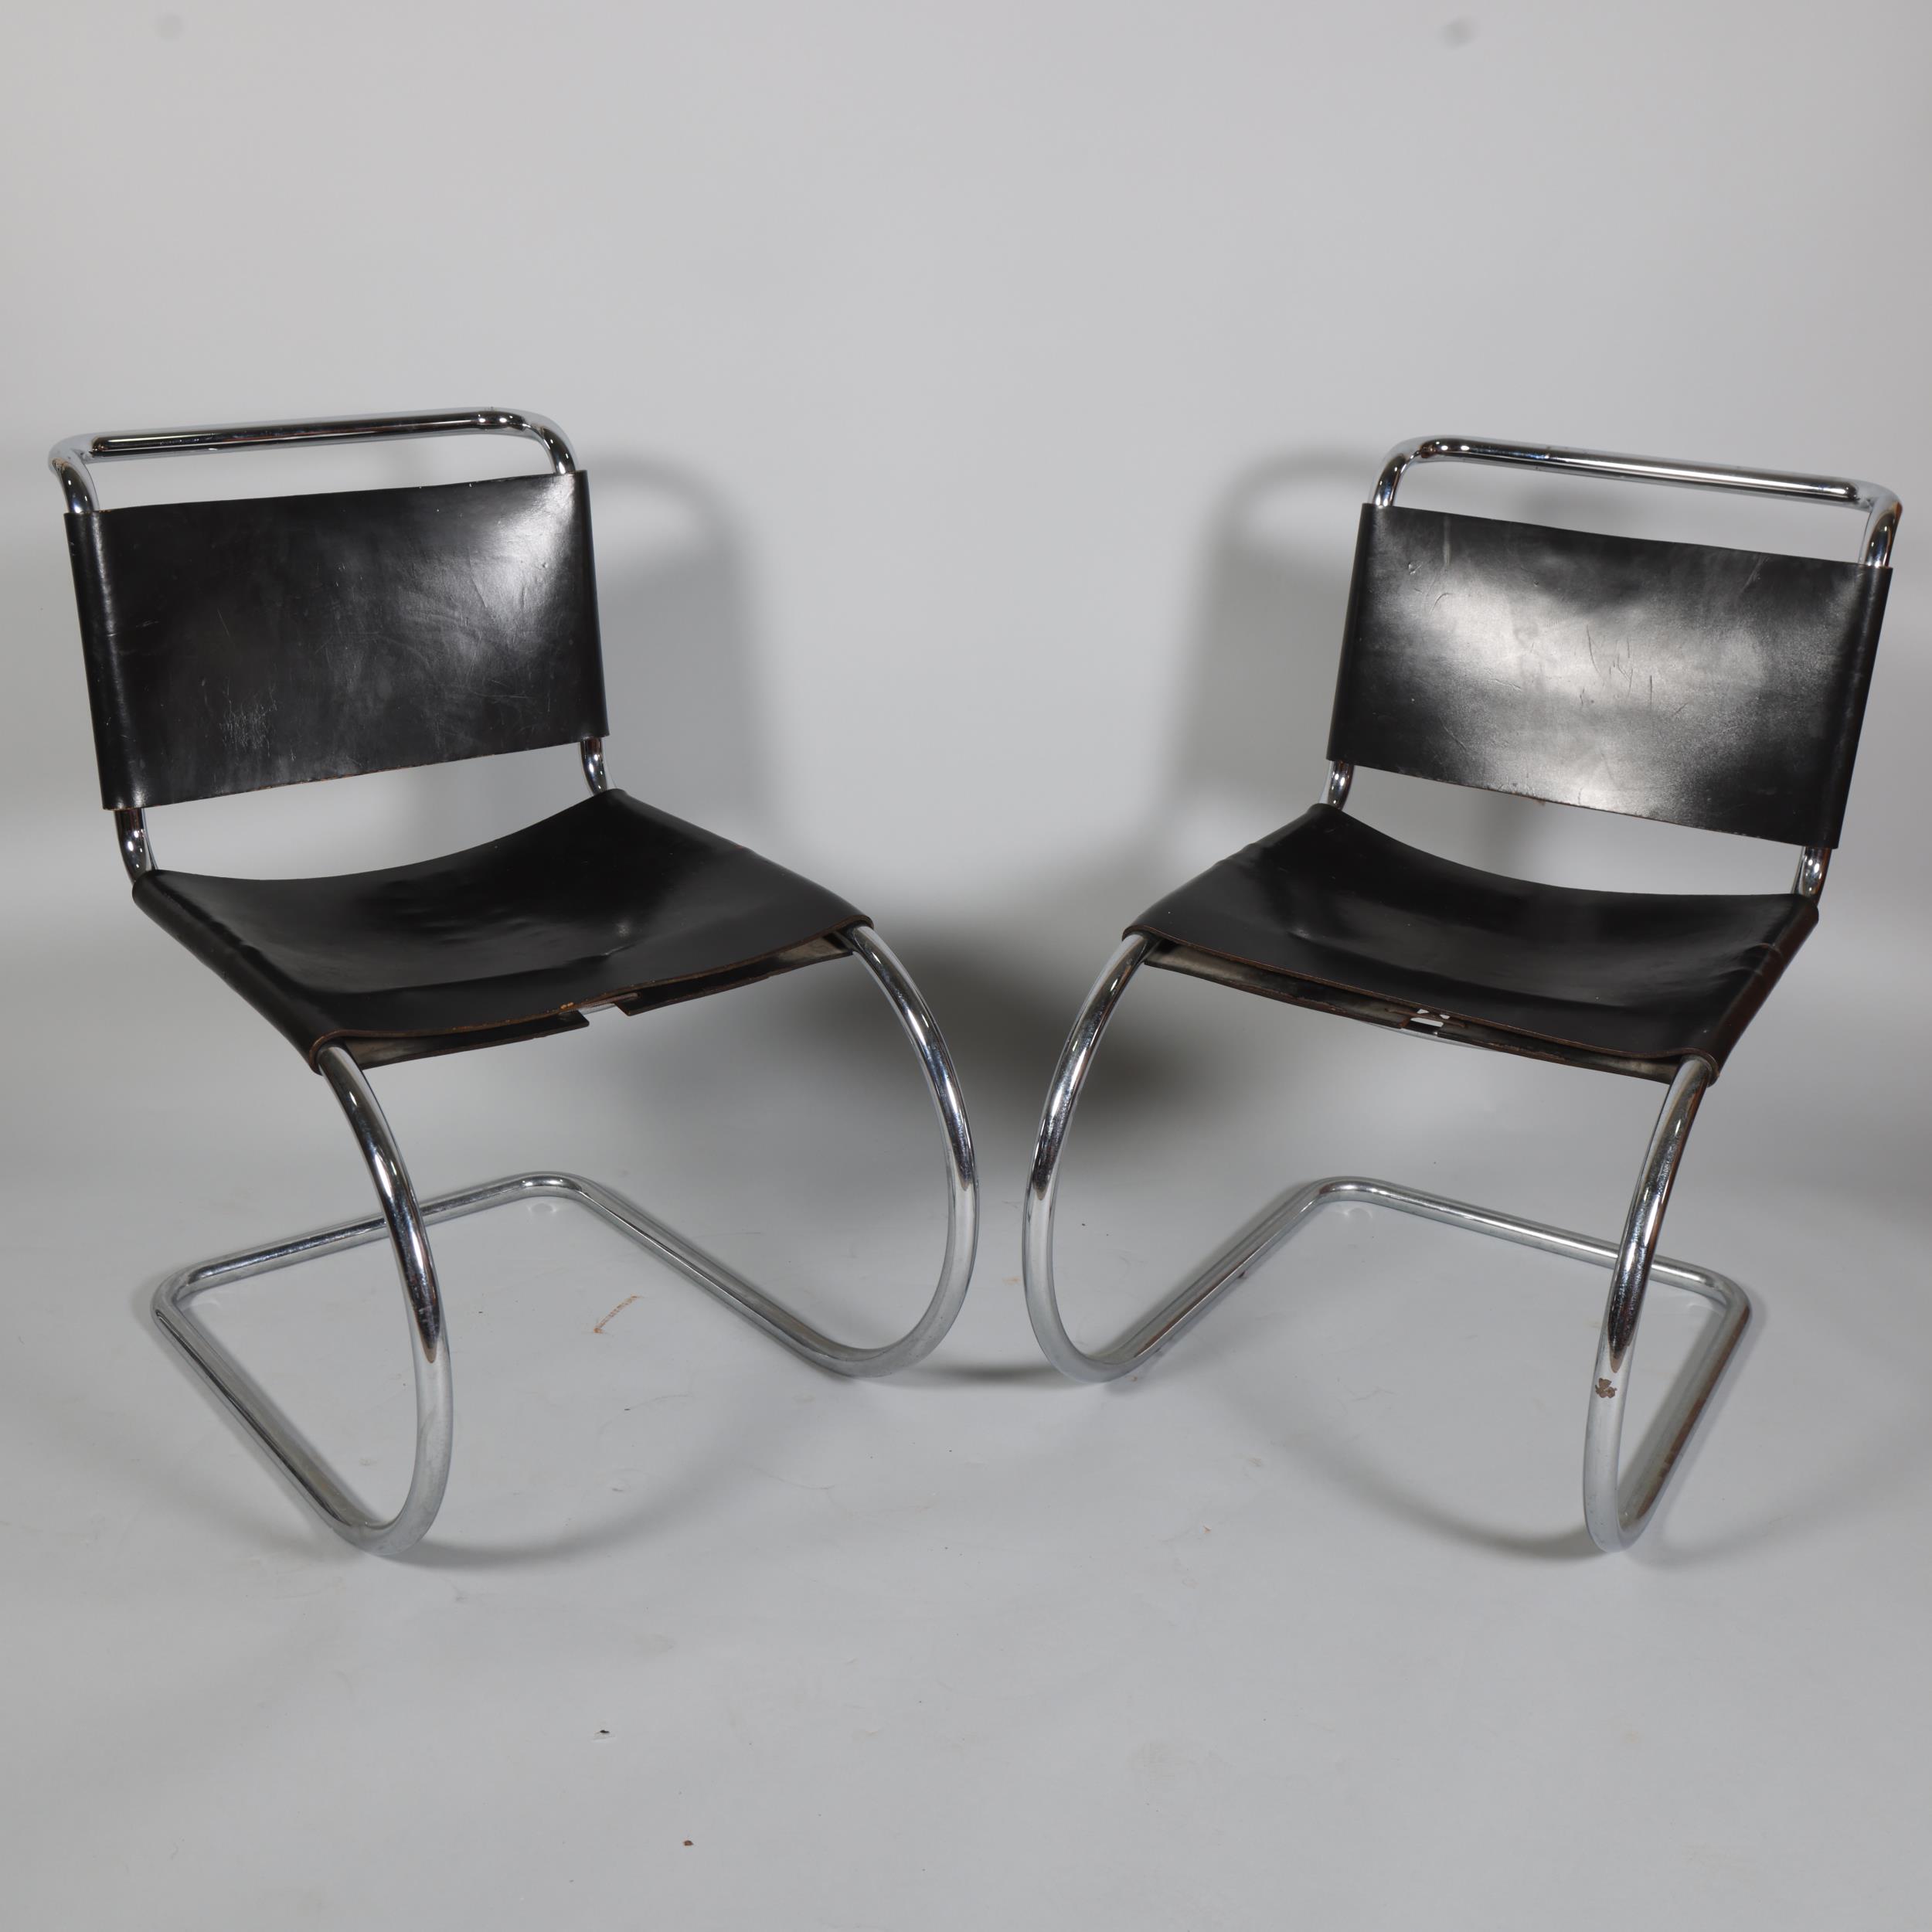 MIES VAN DER ROHE for KNOLL - an early pair of MR10 cantilever tubular steel side chairs with